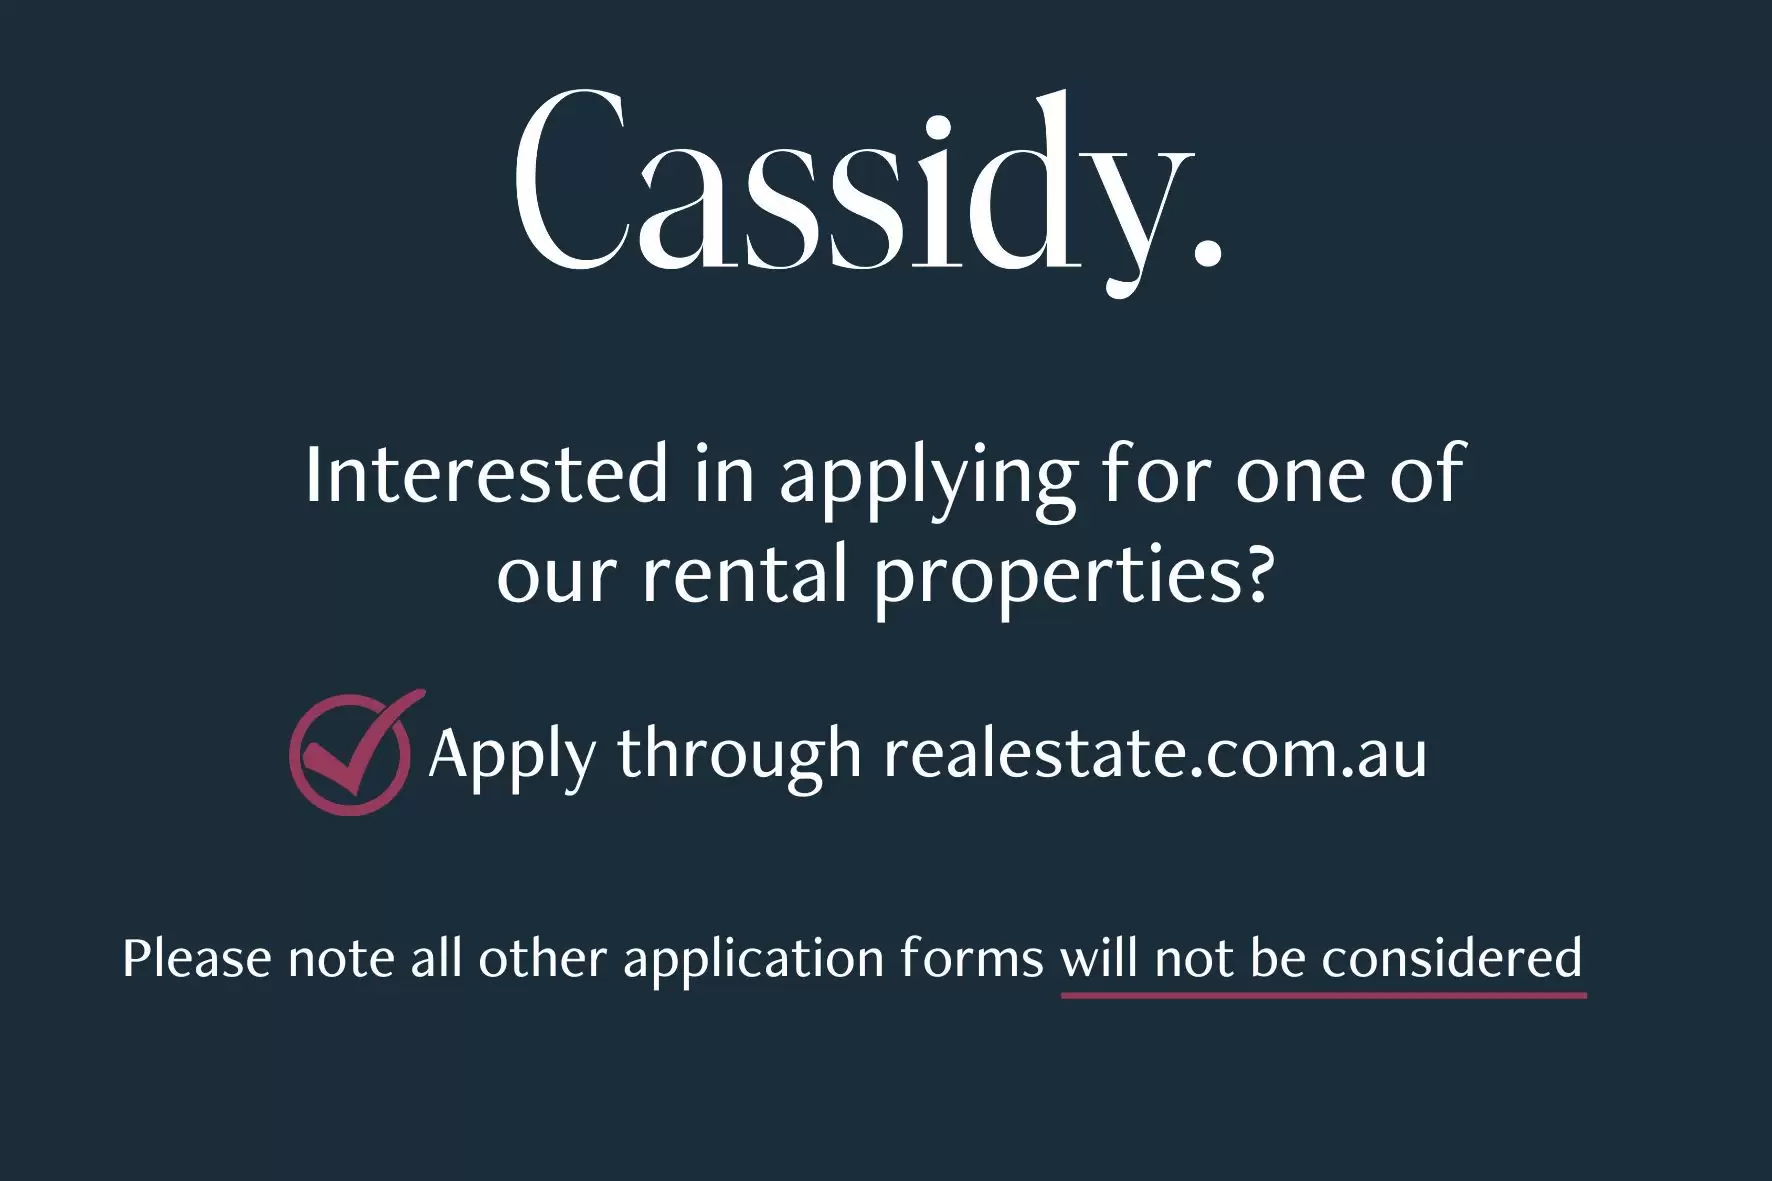 20 Millwood Avenue, Chatswood West For Lease by Cassidy Real Estate - image 1